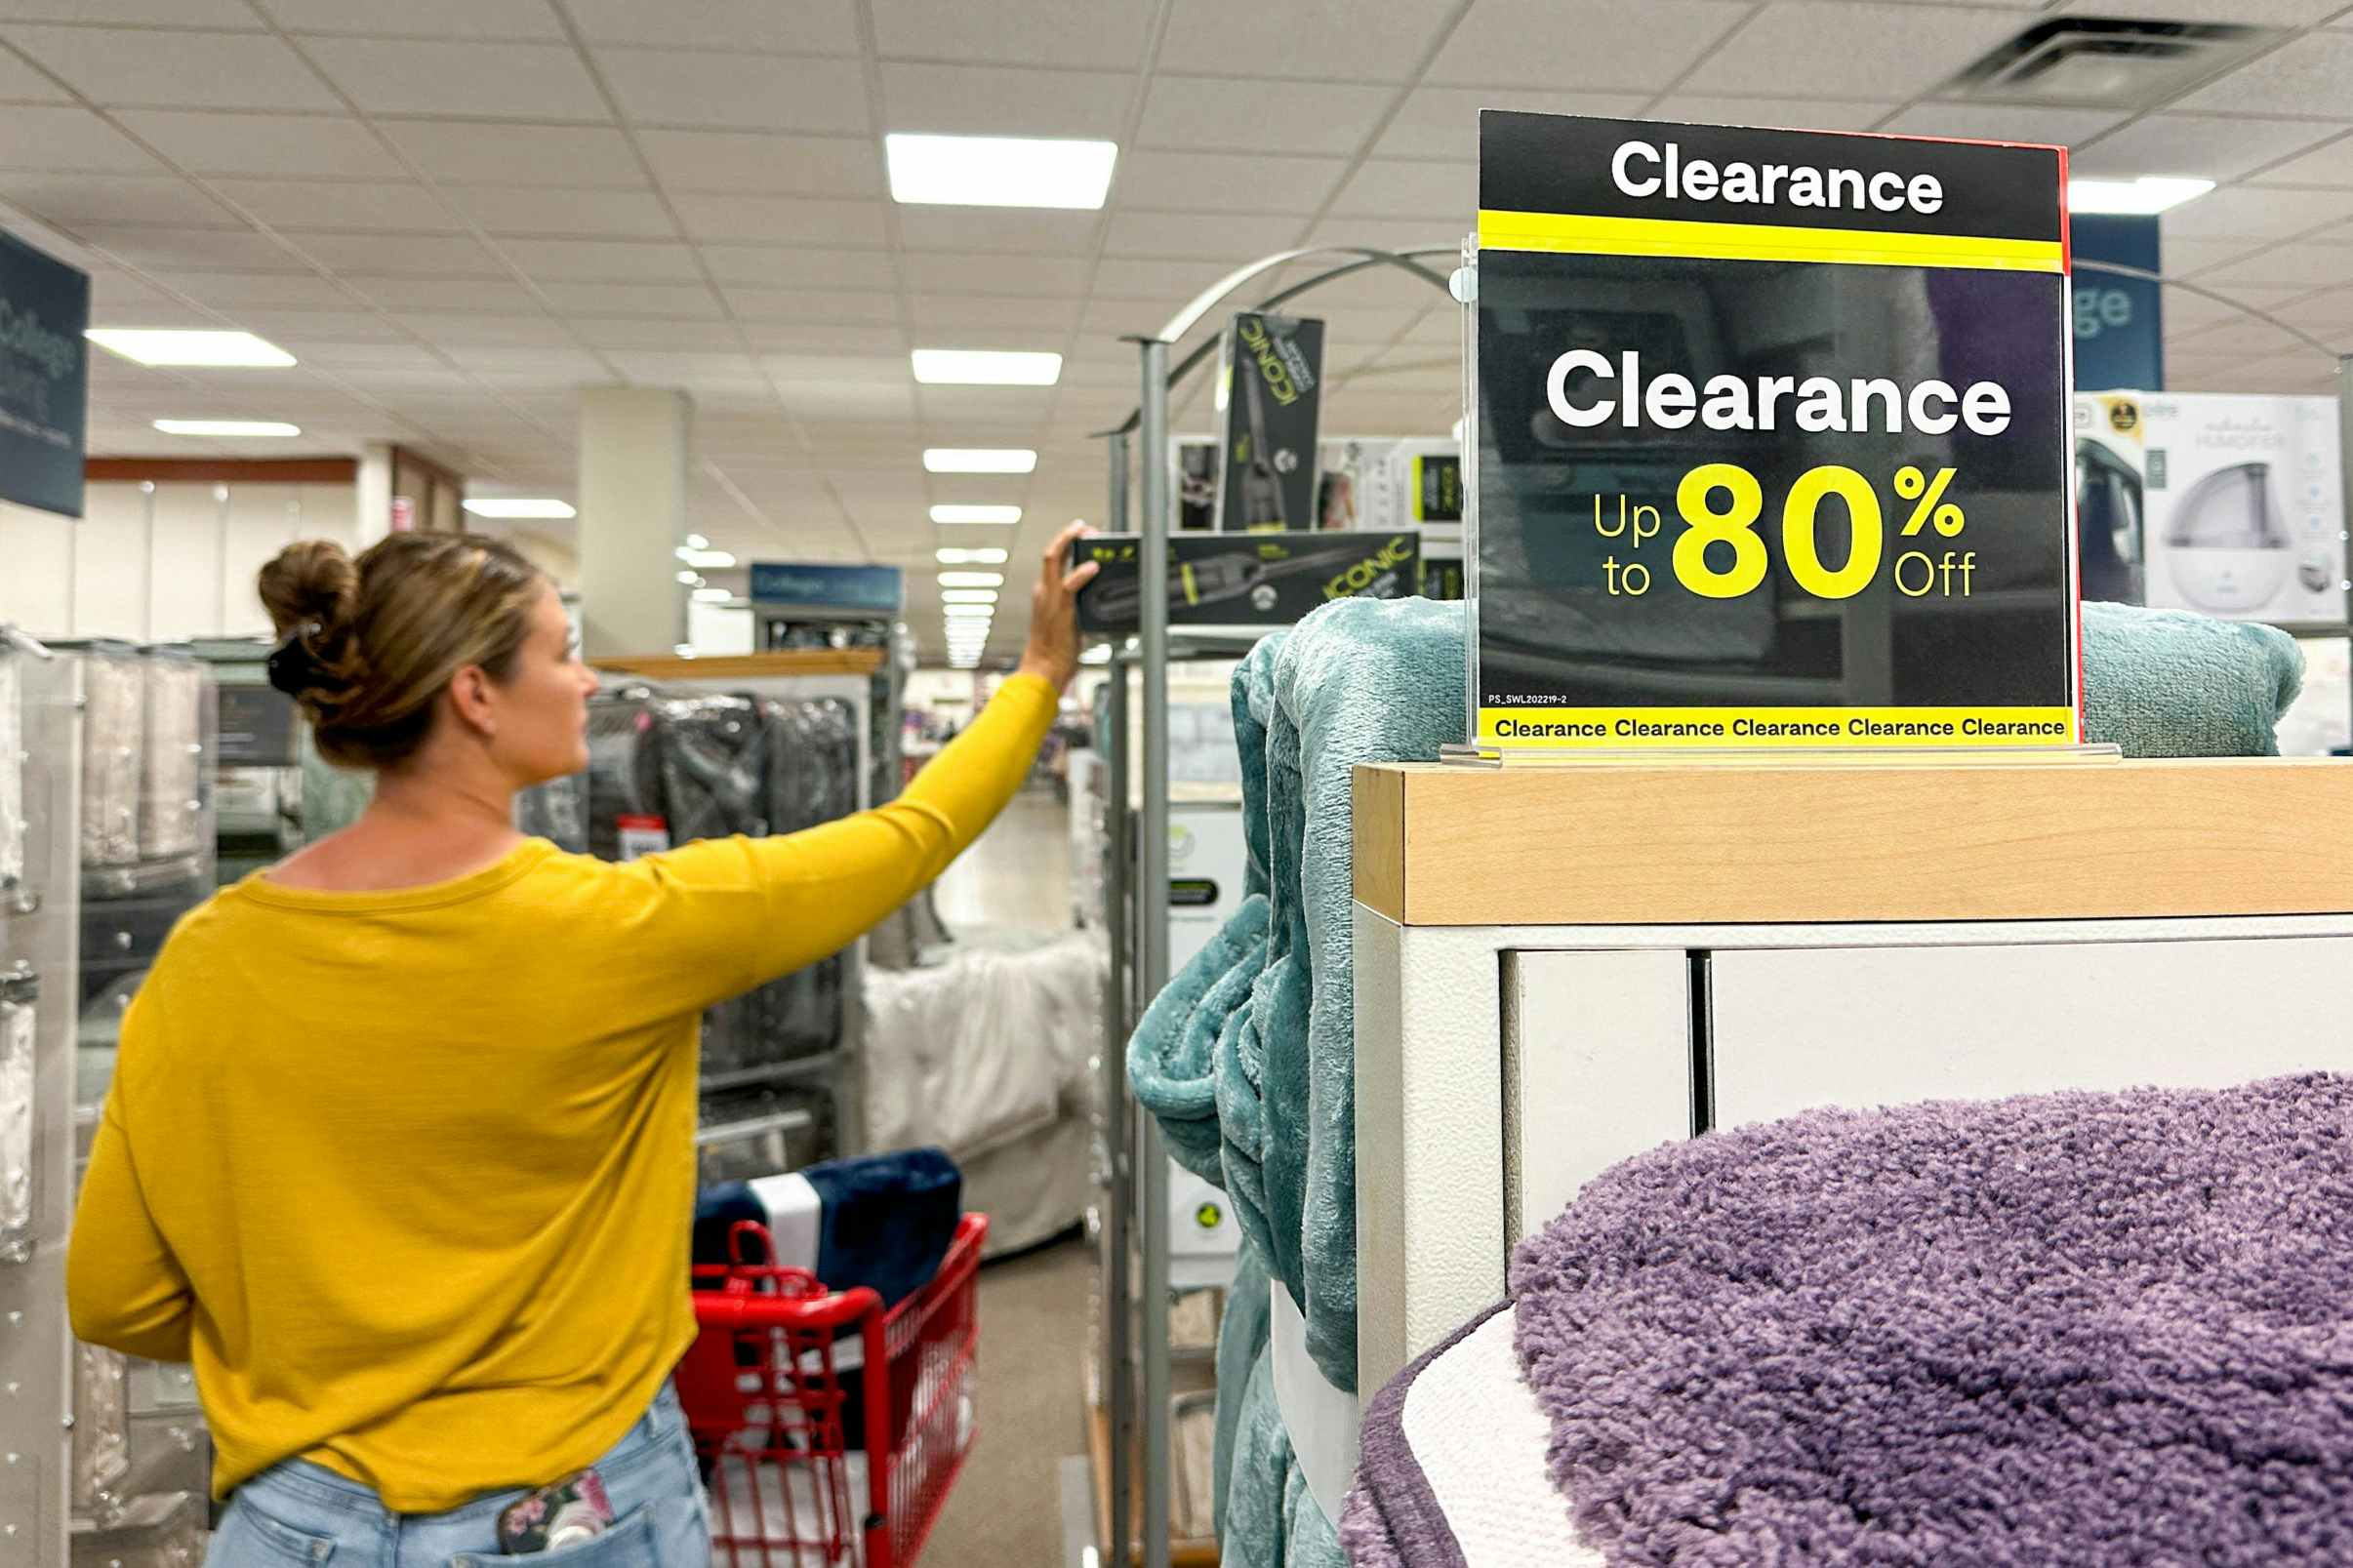 jcpenney-jcp-clearance-sale-kcl-model-2